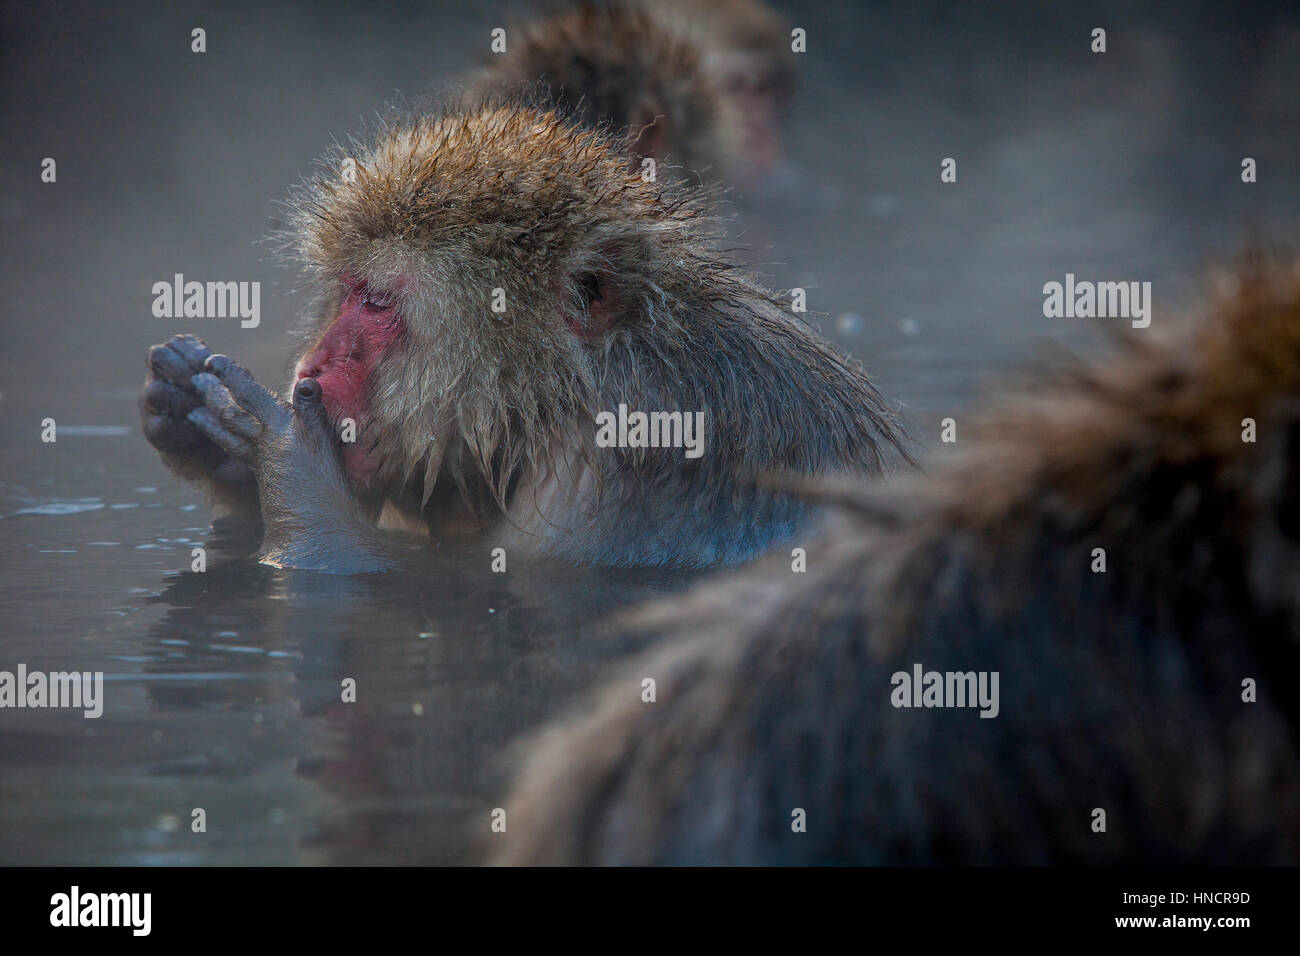 Monkeys in a natural onsen (hot spring), located in Jigokudani Monkey Park, Nagono prefecture,Japan. Stock Photo